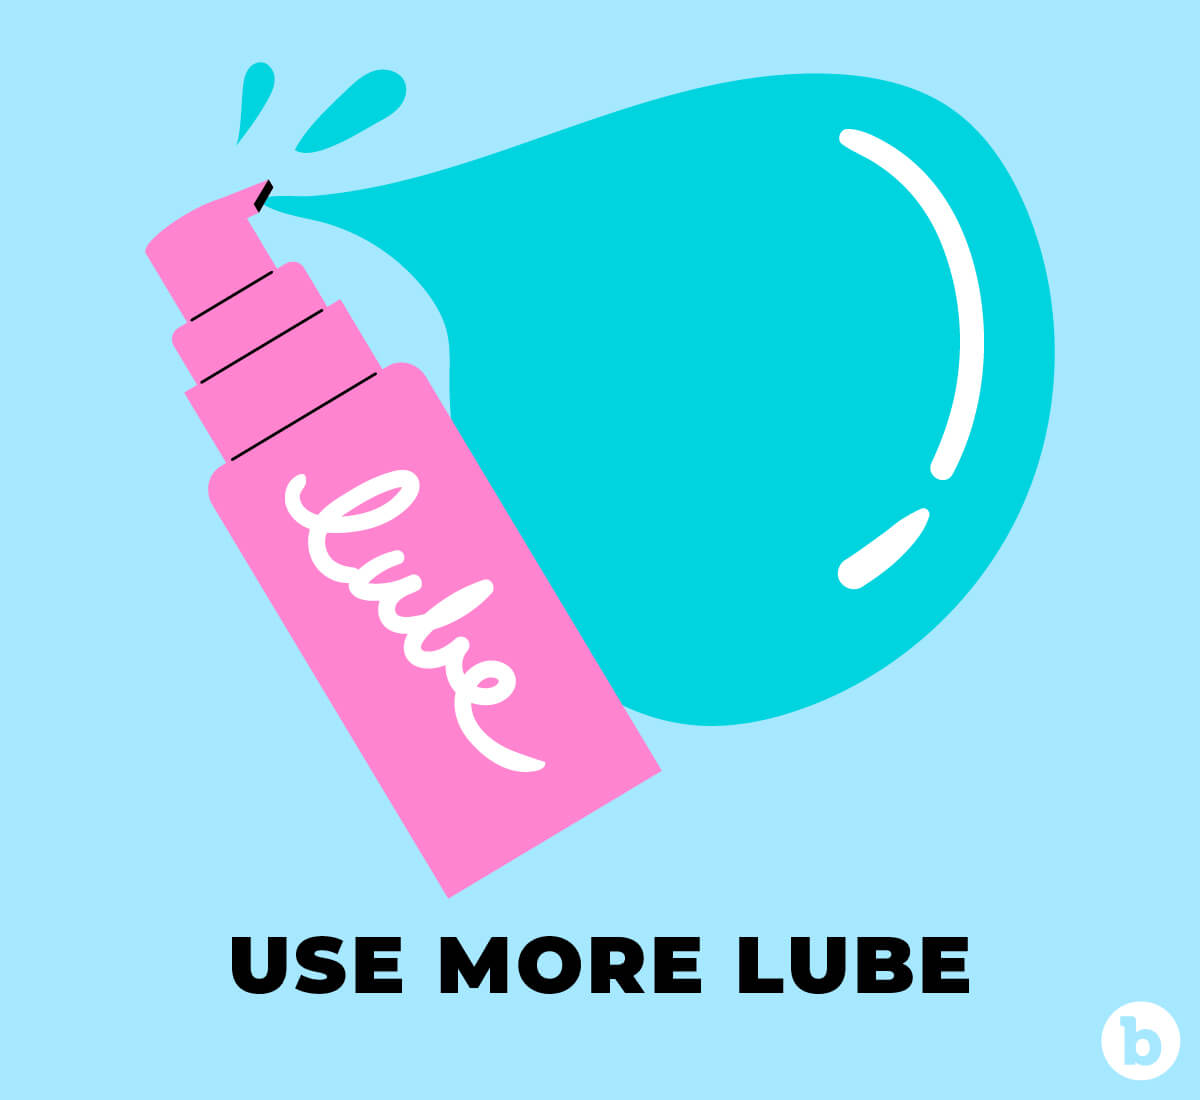 Lube is essential to anal play and should be an indispensable part of your booty resolutions 